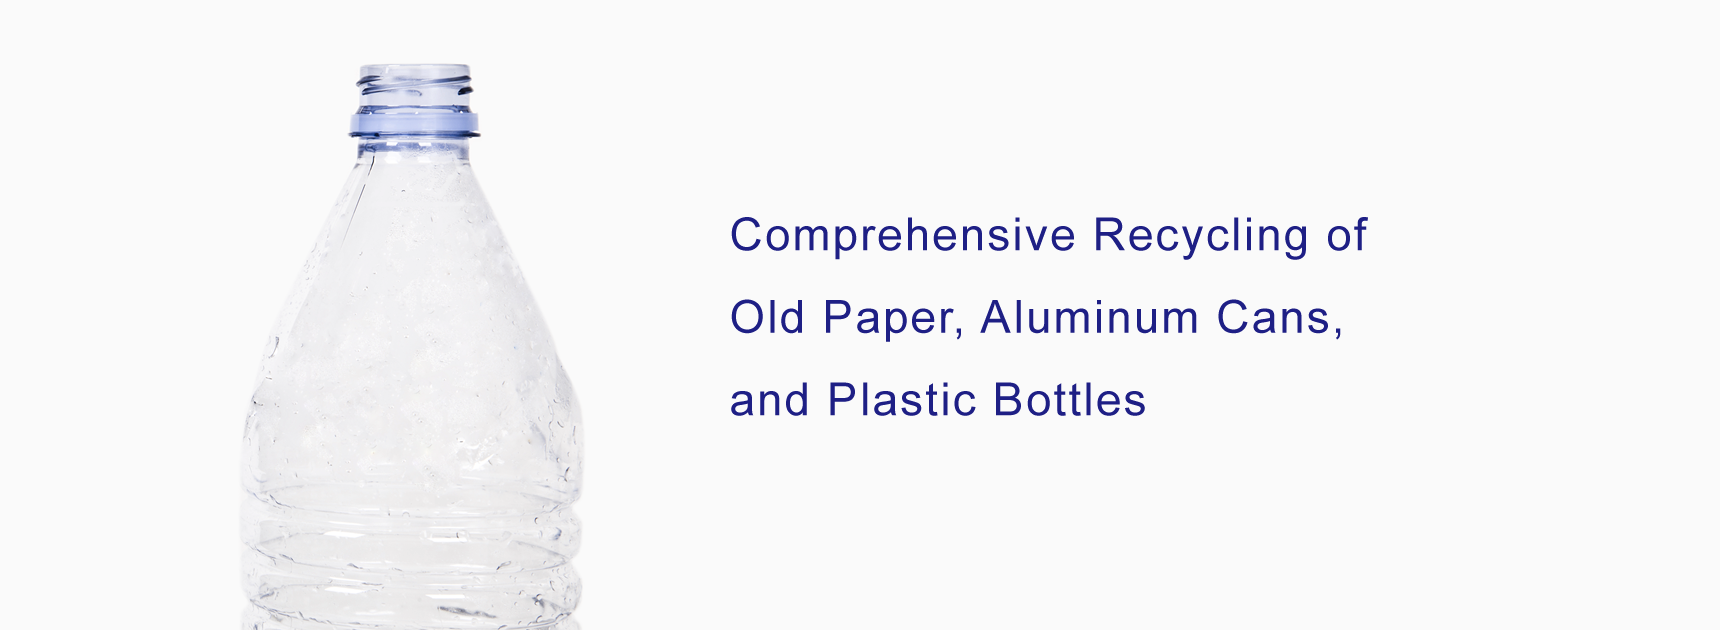 Comprehensive Recycling of Old Paper, Aluminum Cans, and Plastic Bottles